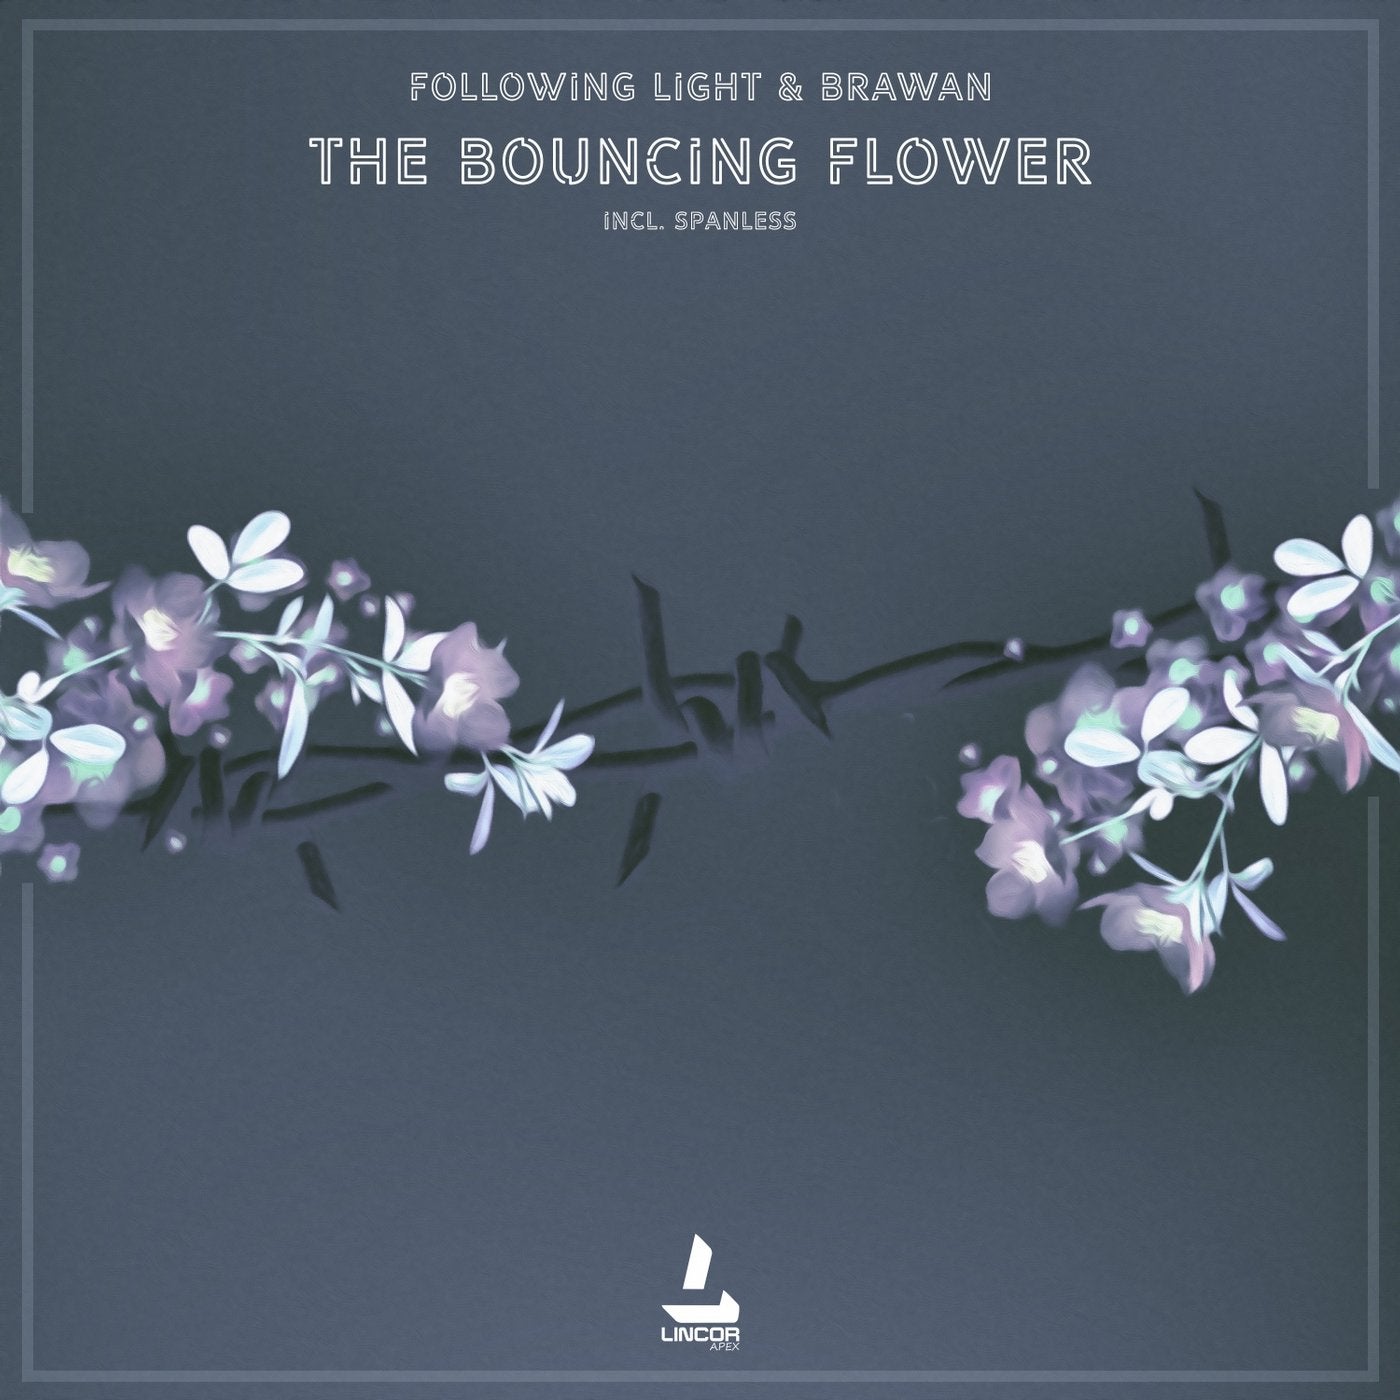 The Bouncing Flower